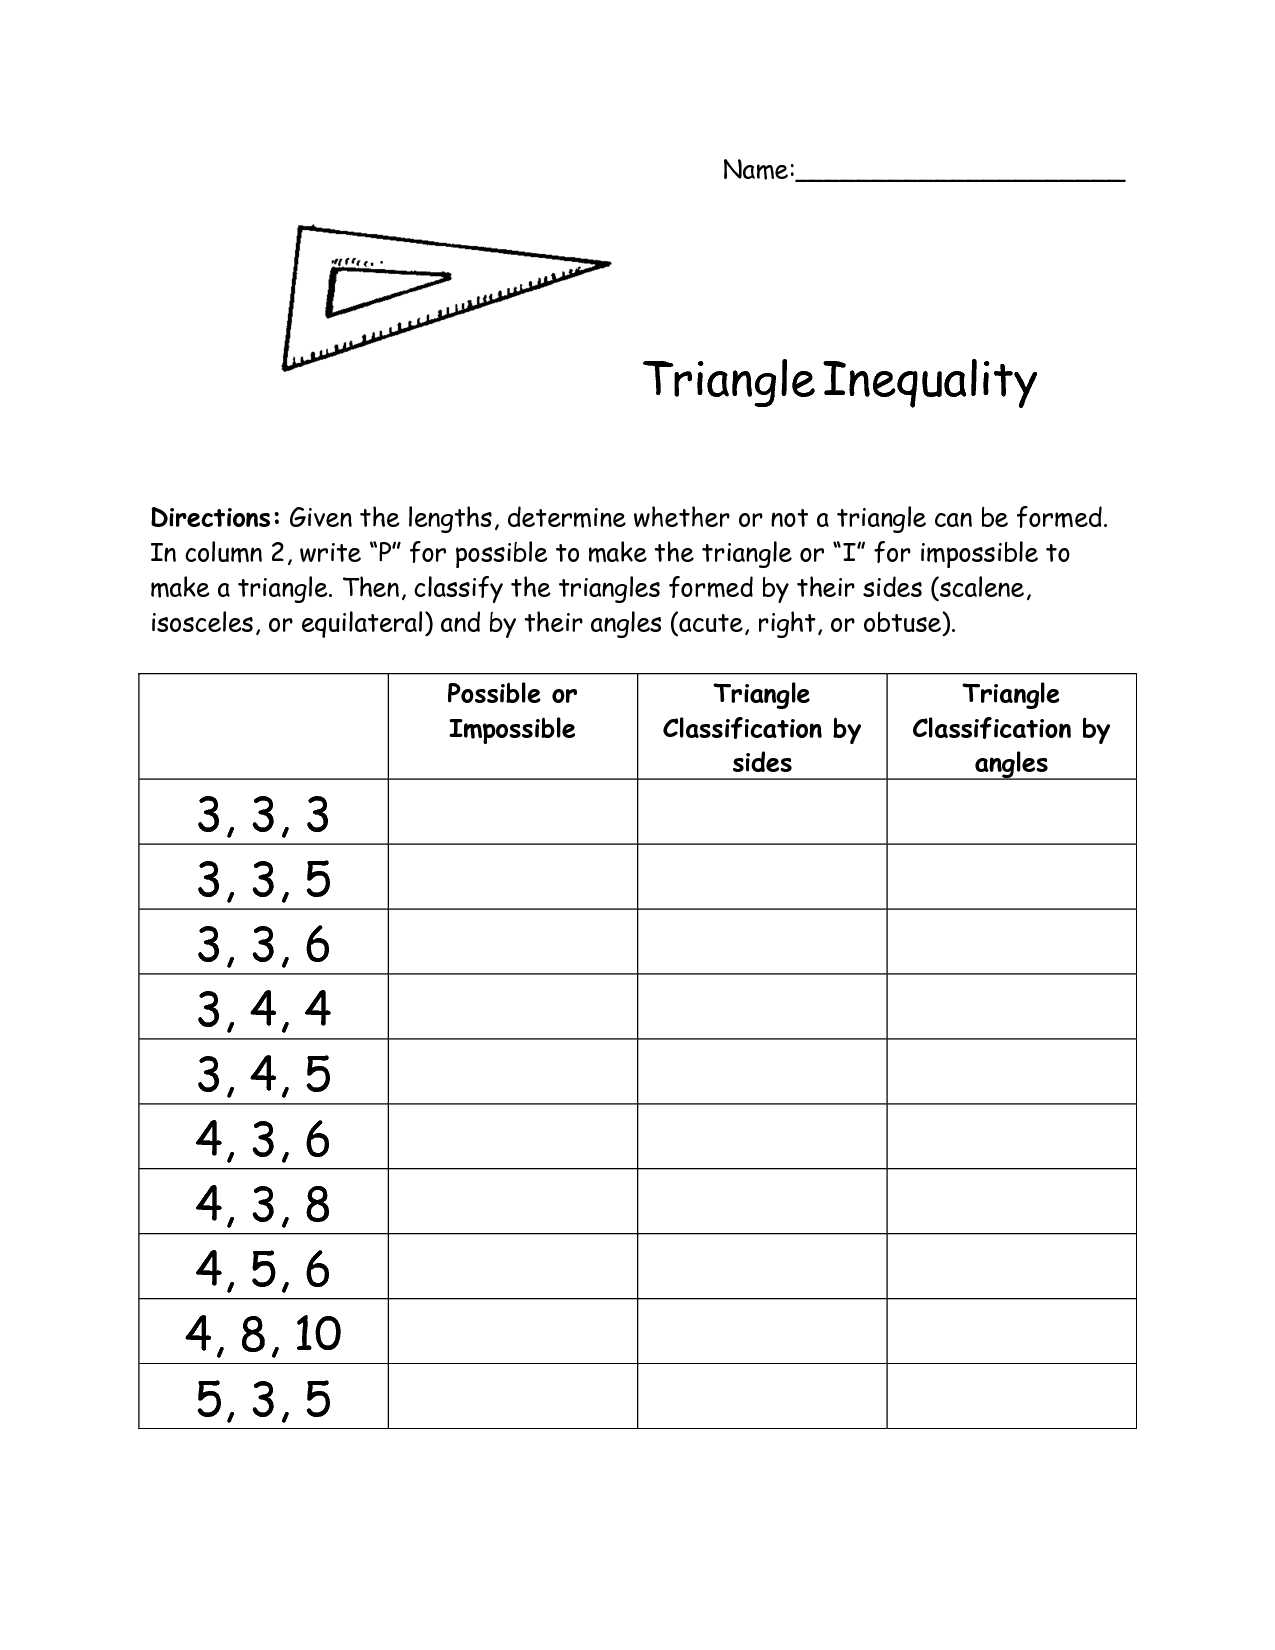 6th Grade Inequalities Worksheet and Triangle Inequality theorem to Use with Straws